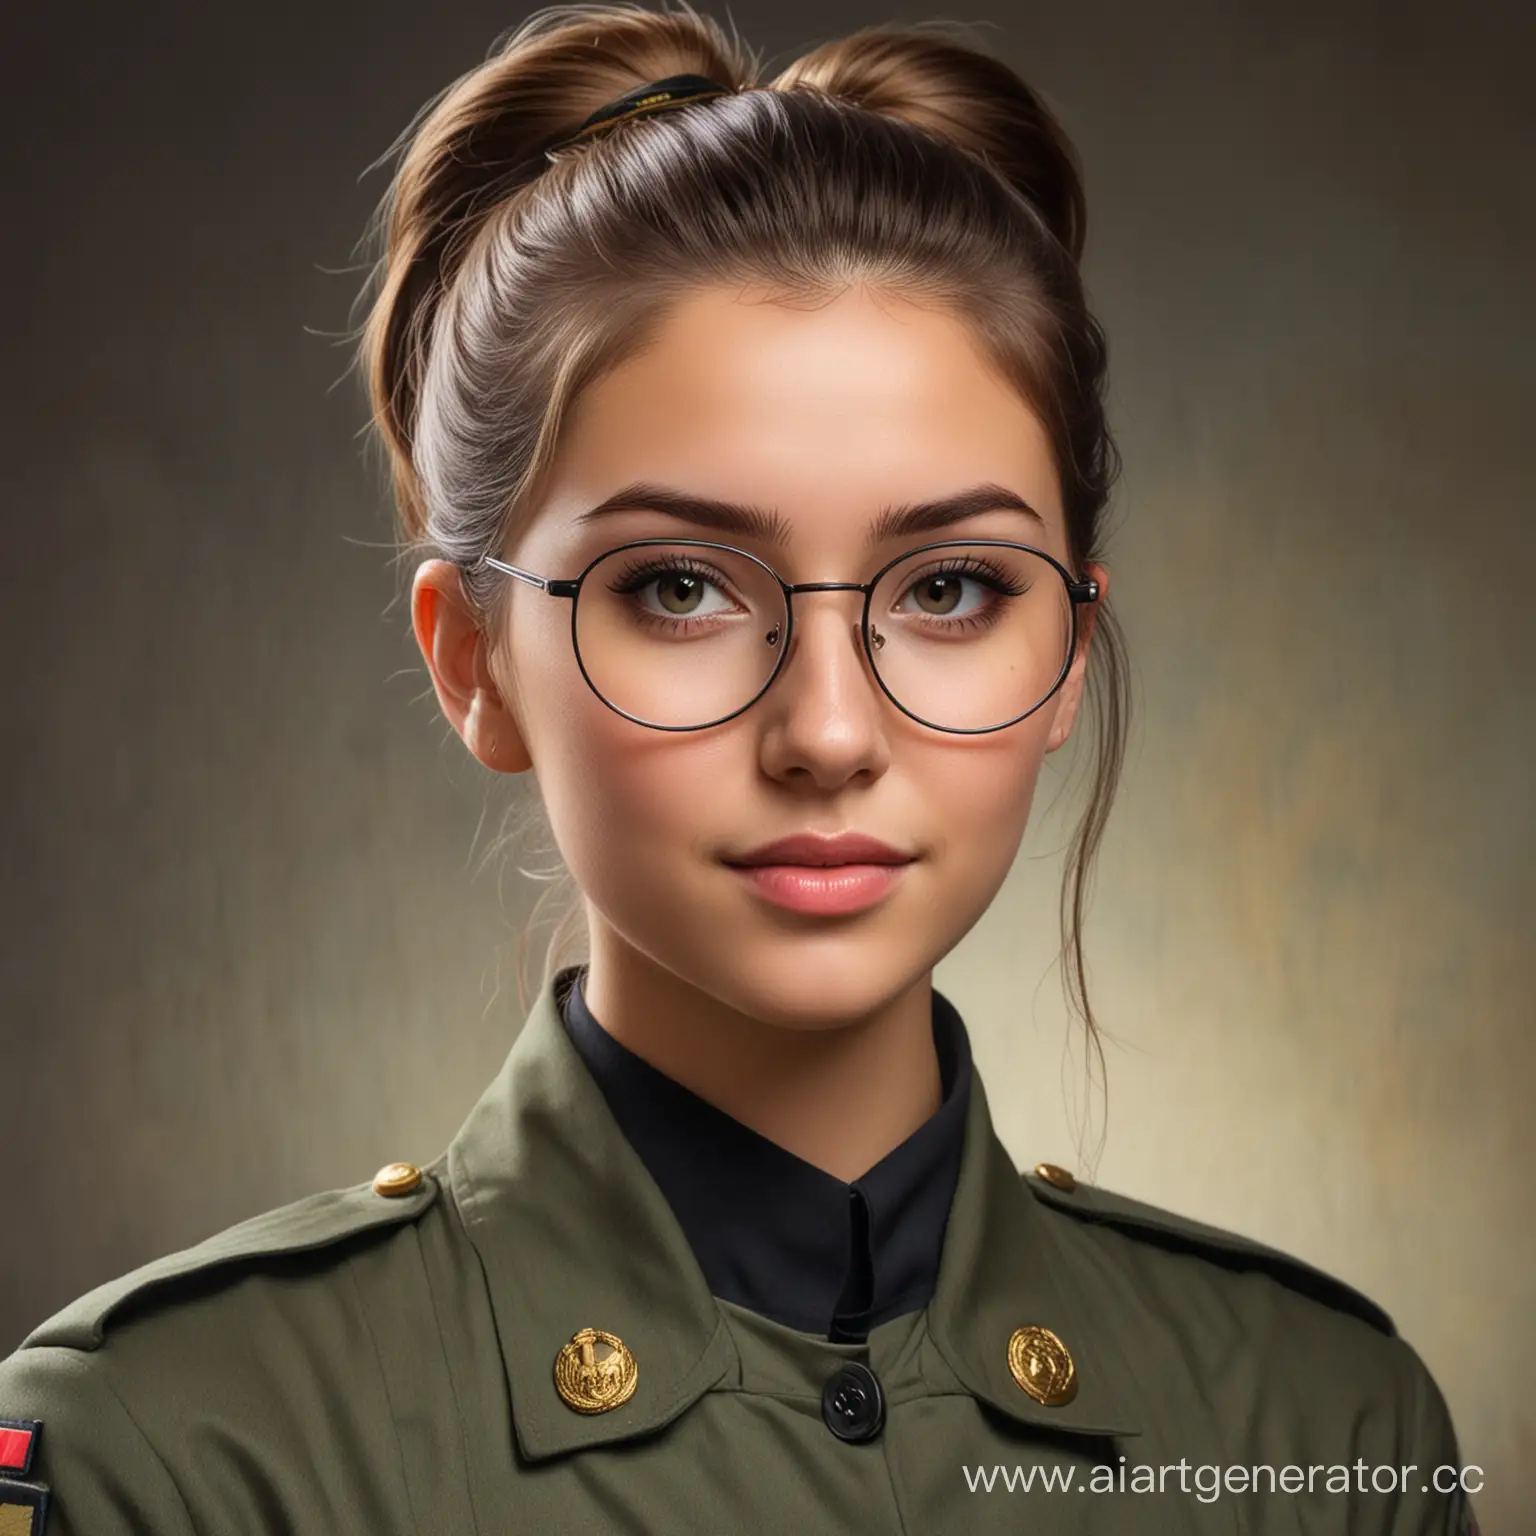 Portrait-of-a-25YearOld-Girl-in-Military-Uniform-with-Round-Glasses-and-Ponytail